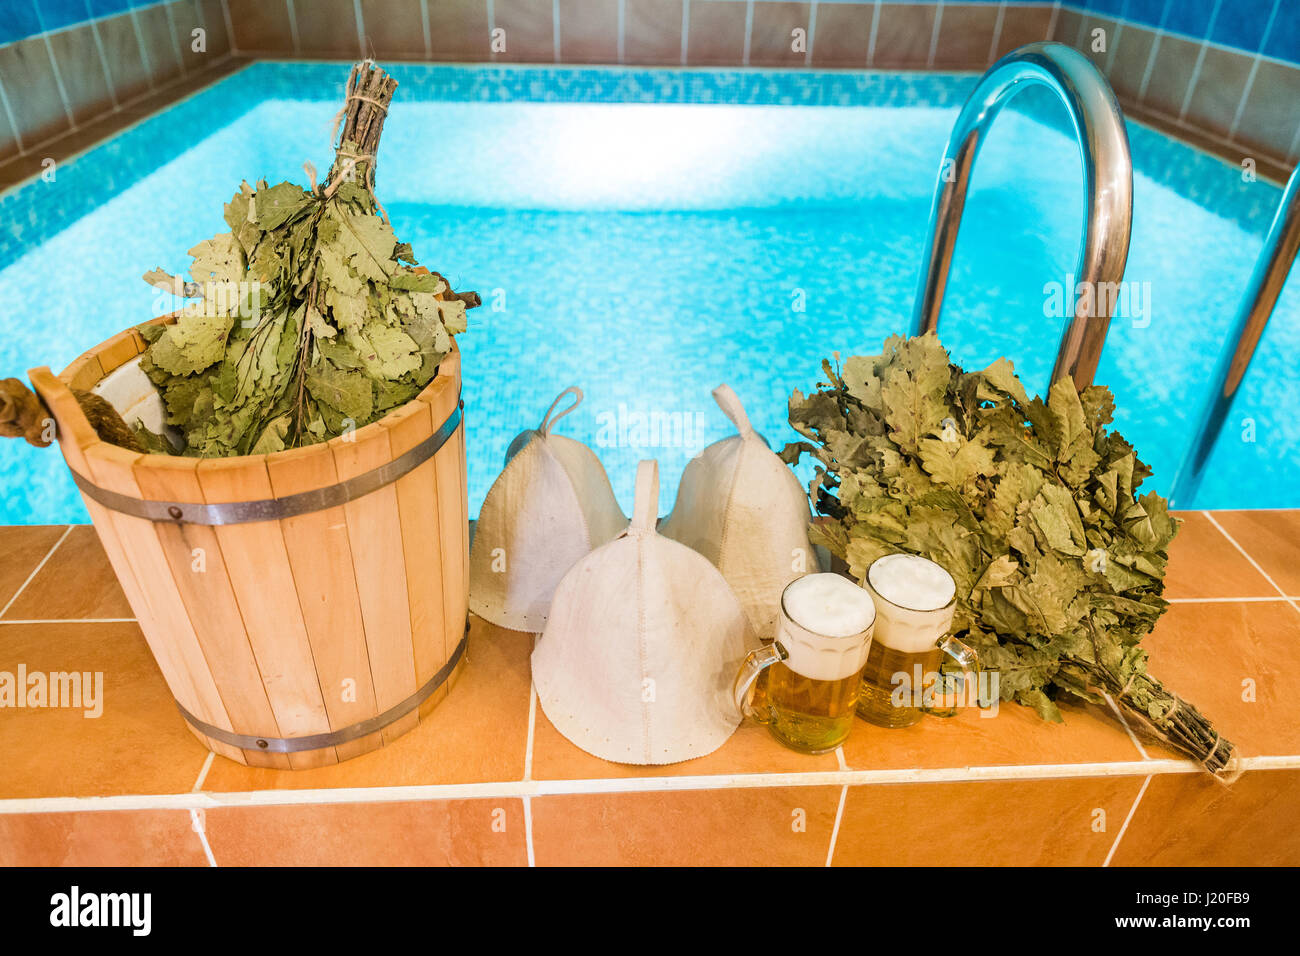 Bath accessories in the Russian bath. Bathroom items of traditional Russian sauna. two mugs of light beer, bathing caps, bath brooms from oak leaves against the background of the pool. Stock Photo